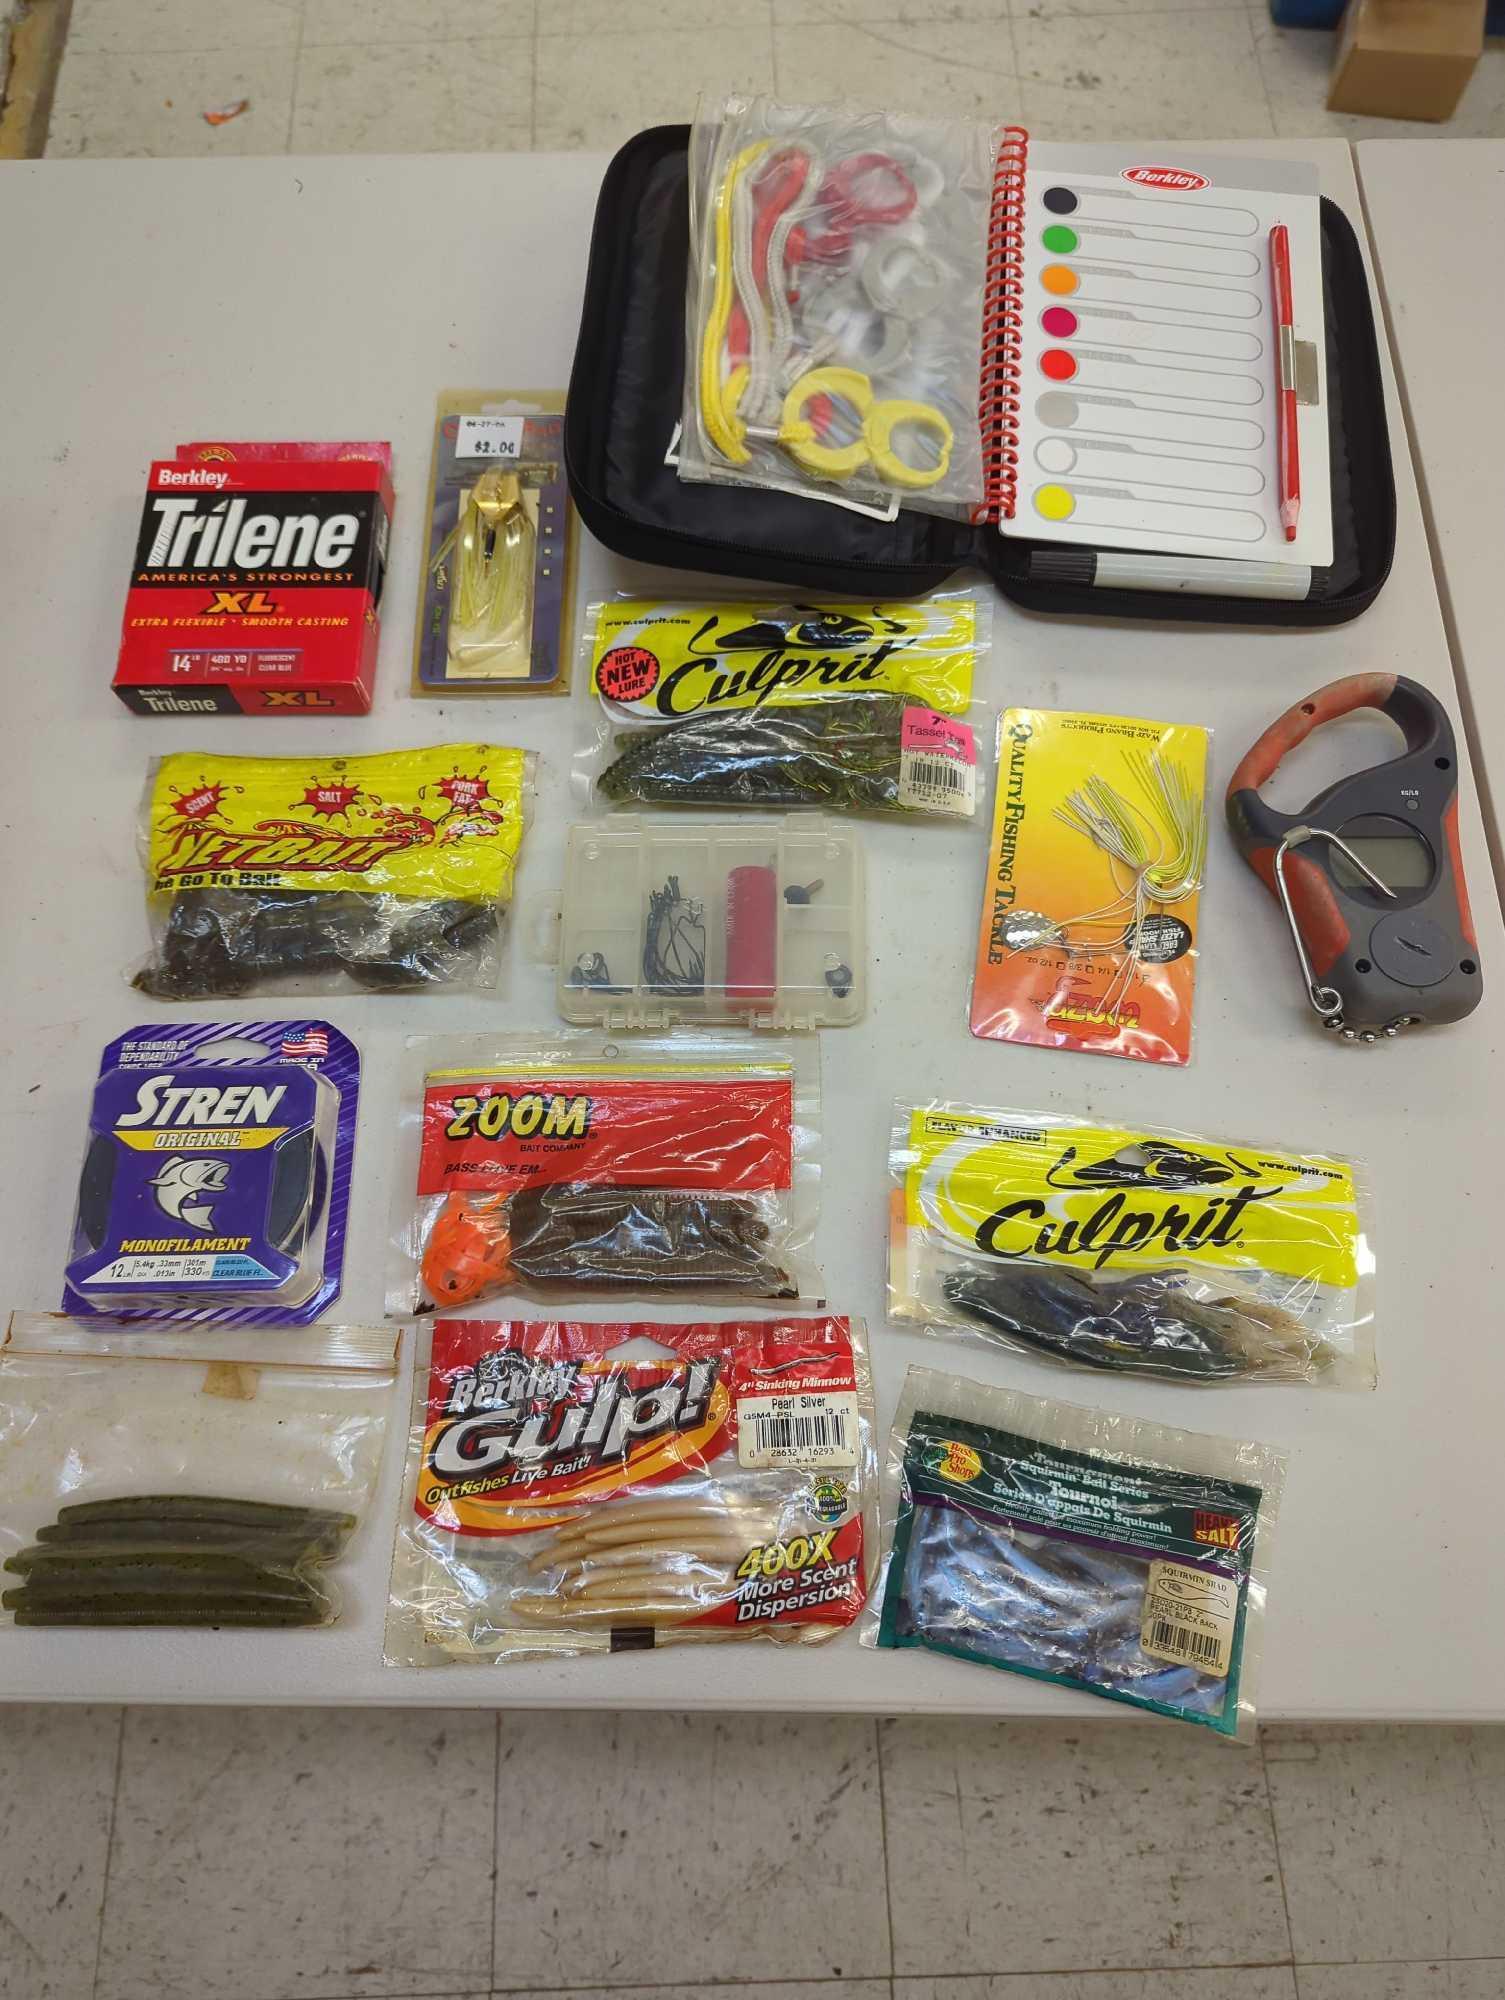 Refrigerator drawer filled with fishing lures and other fishing accessories. Comes as is shown in